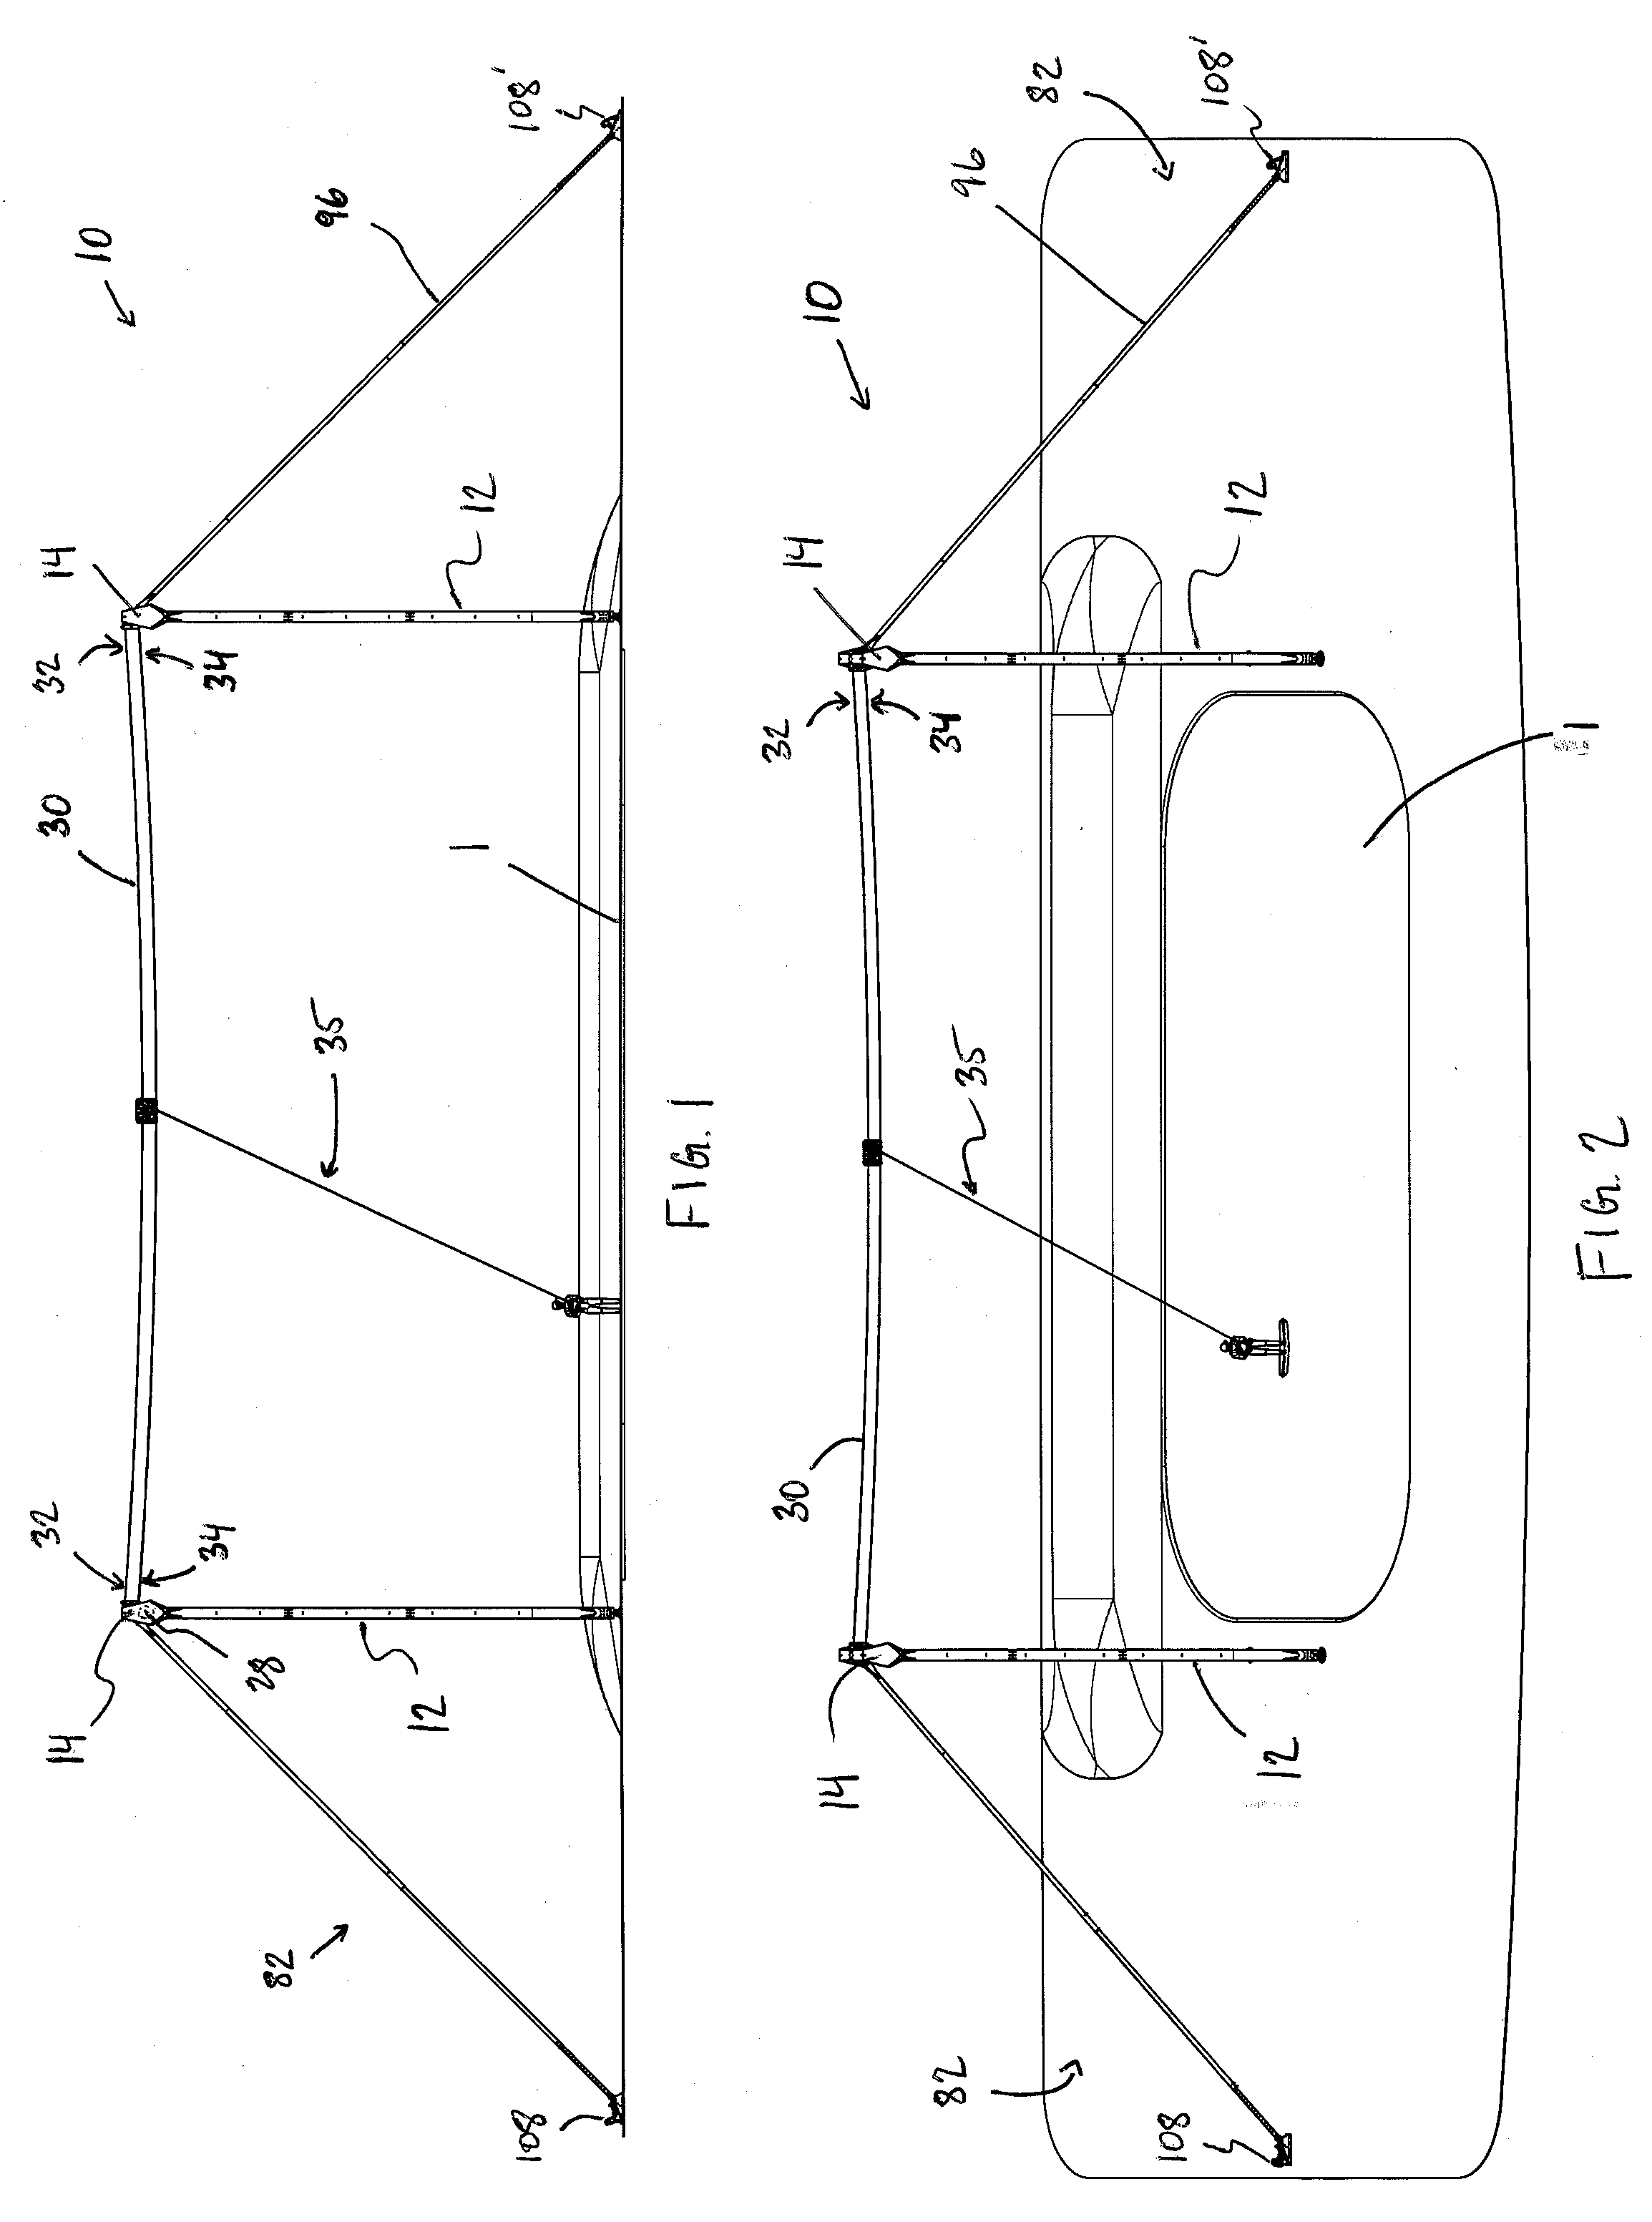 Rigid Tensioning Member and Tension Measuring Device for a Towing System for Towing a User on a Support Material